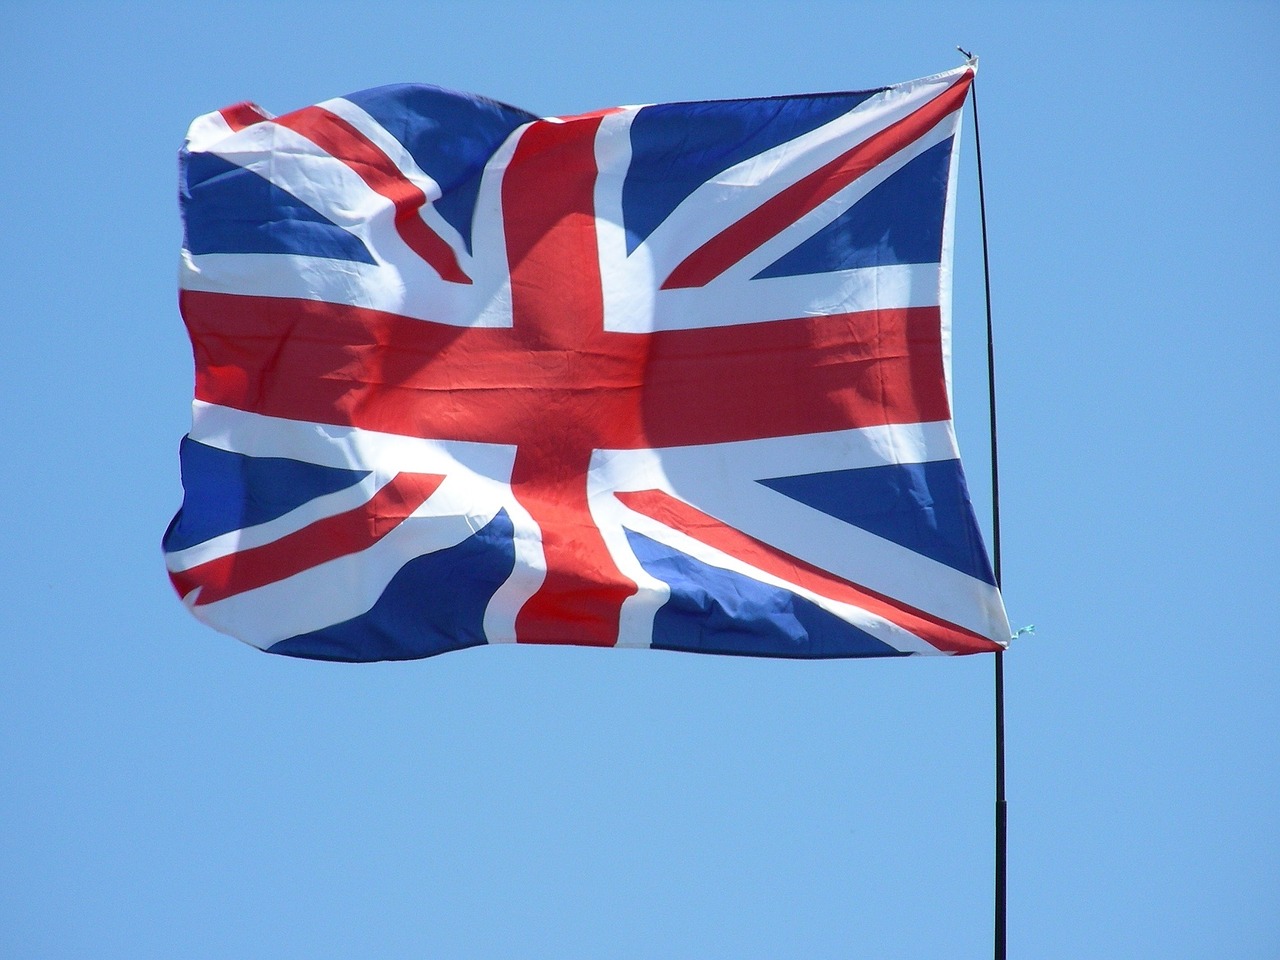 The flag of Great Britain, blowing in the wind.